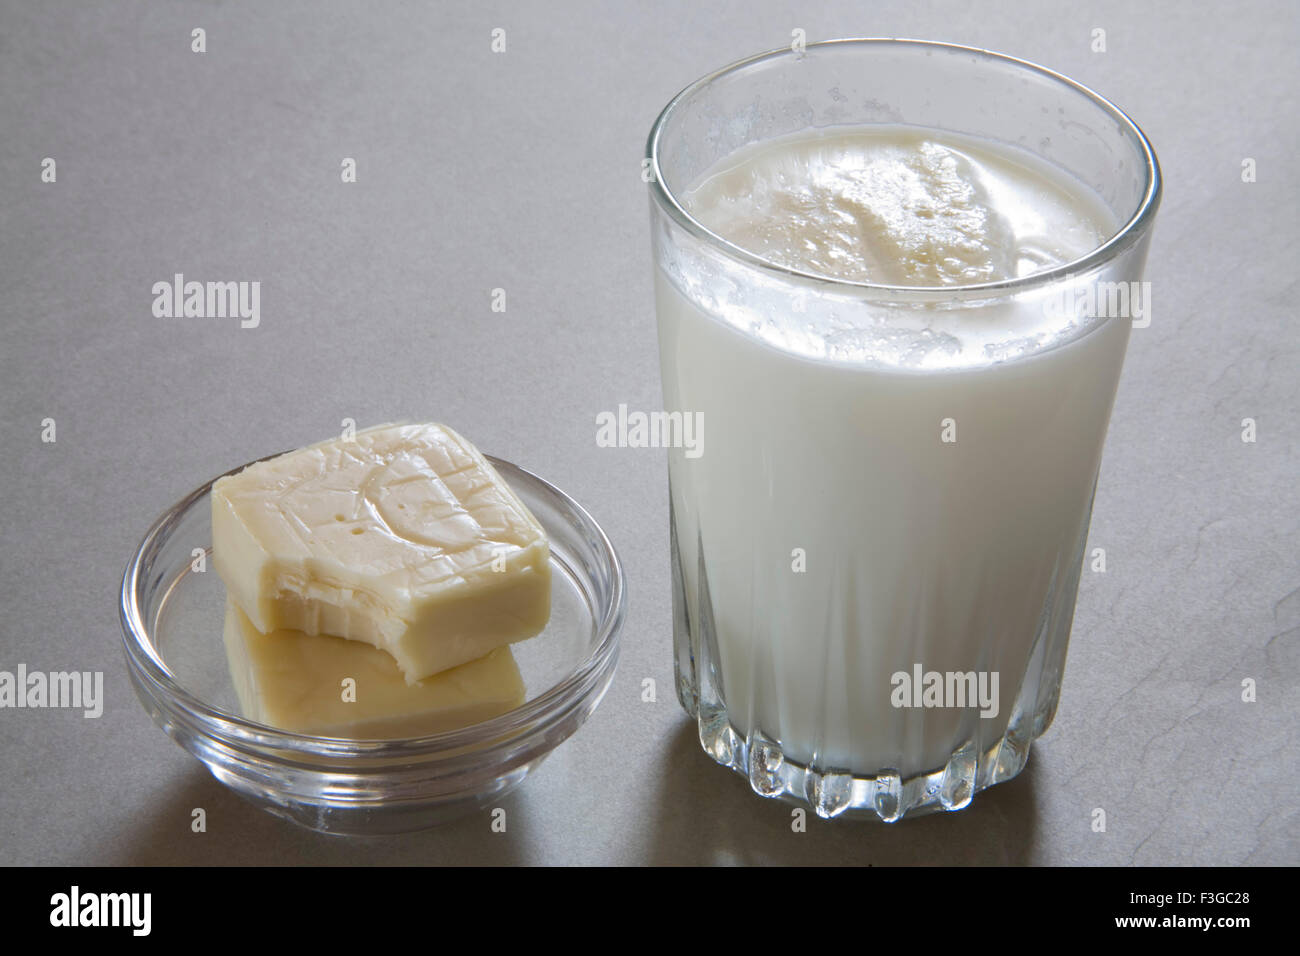 Full glass of milk and cheese made from milk dairy product ; India Stock Photo